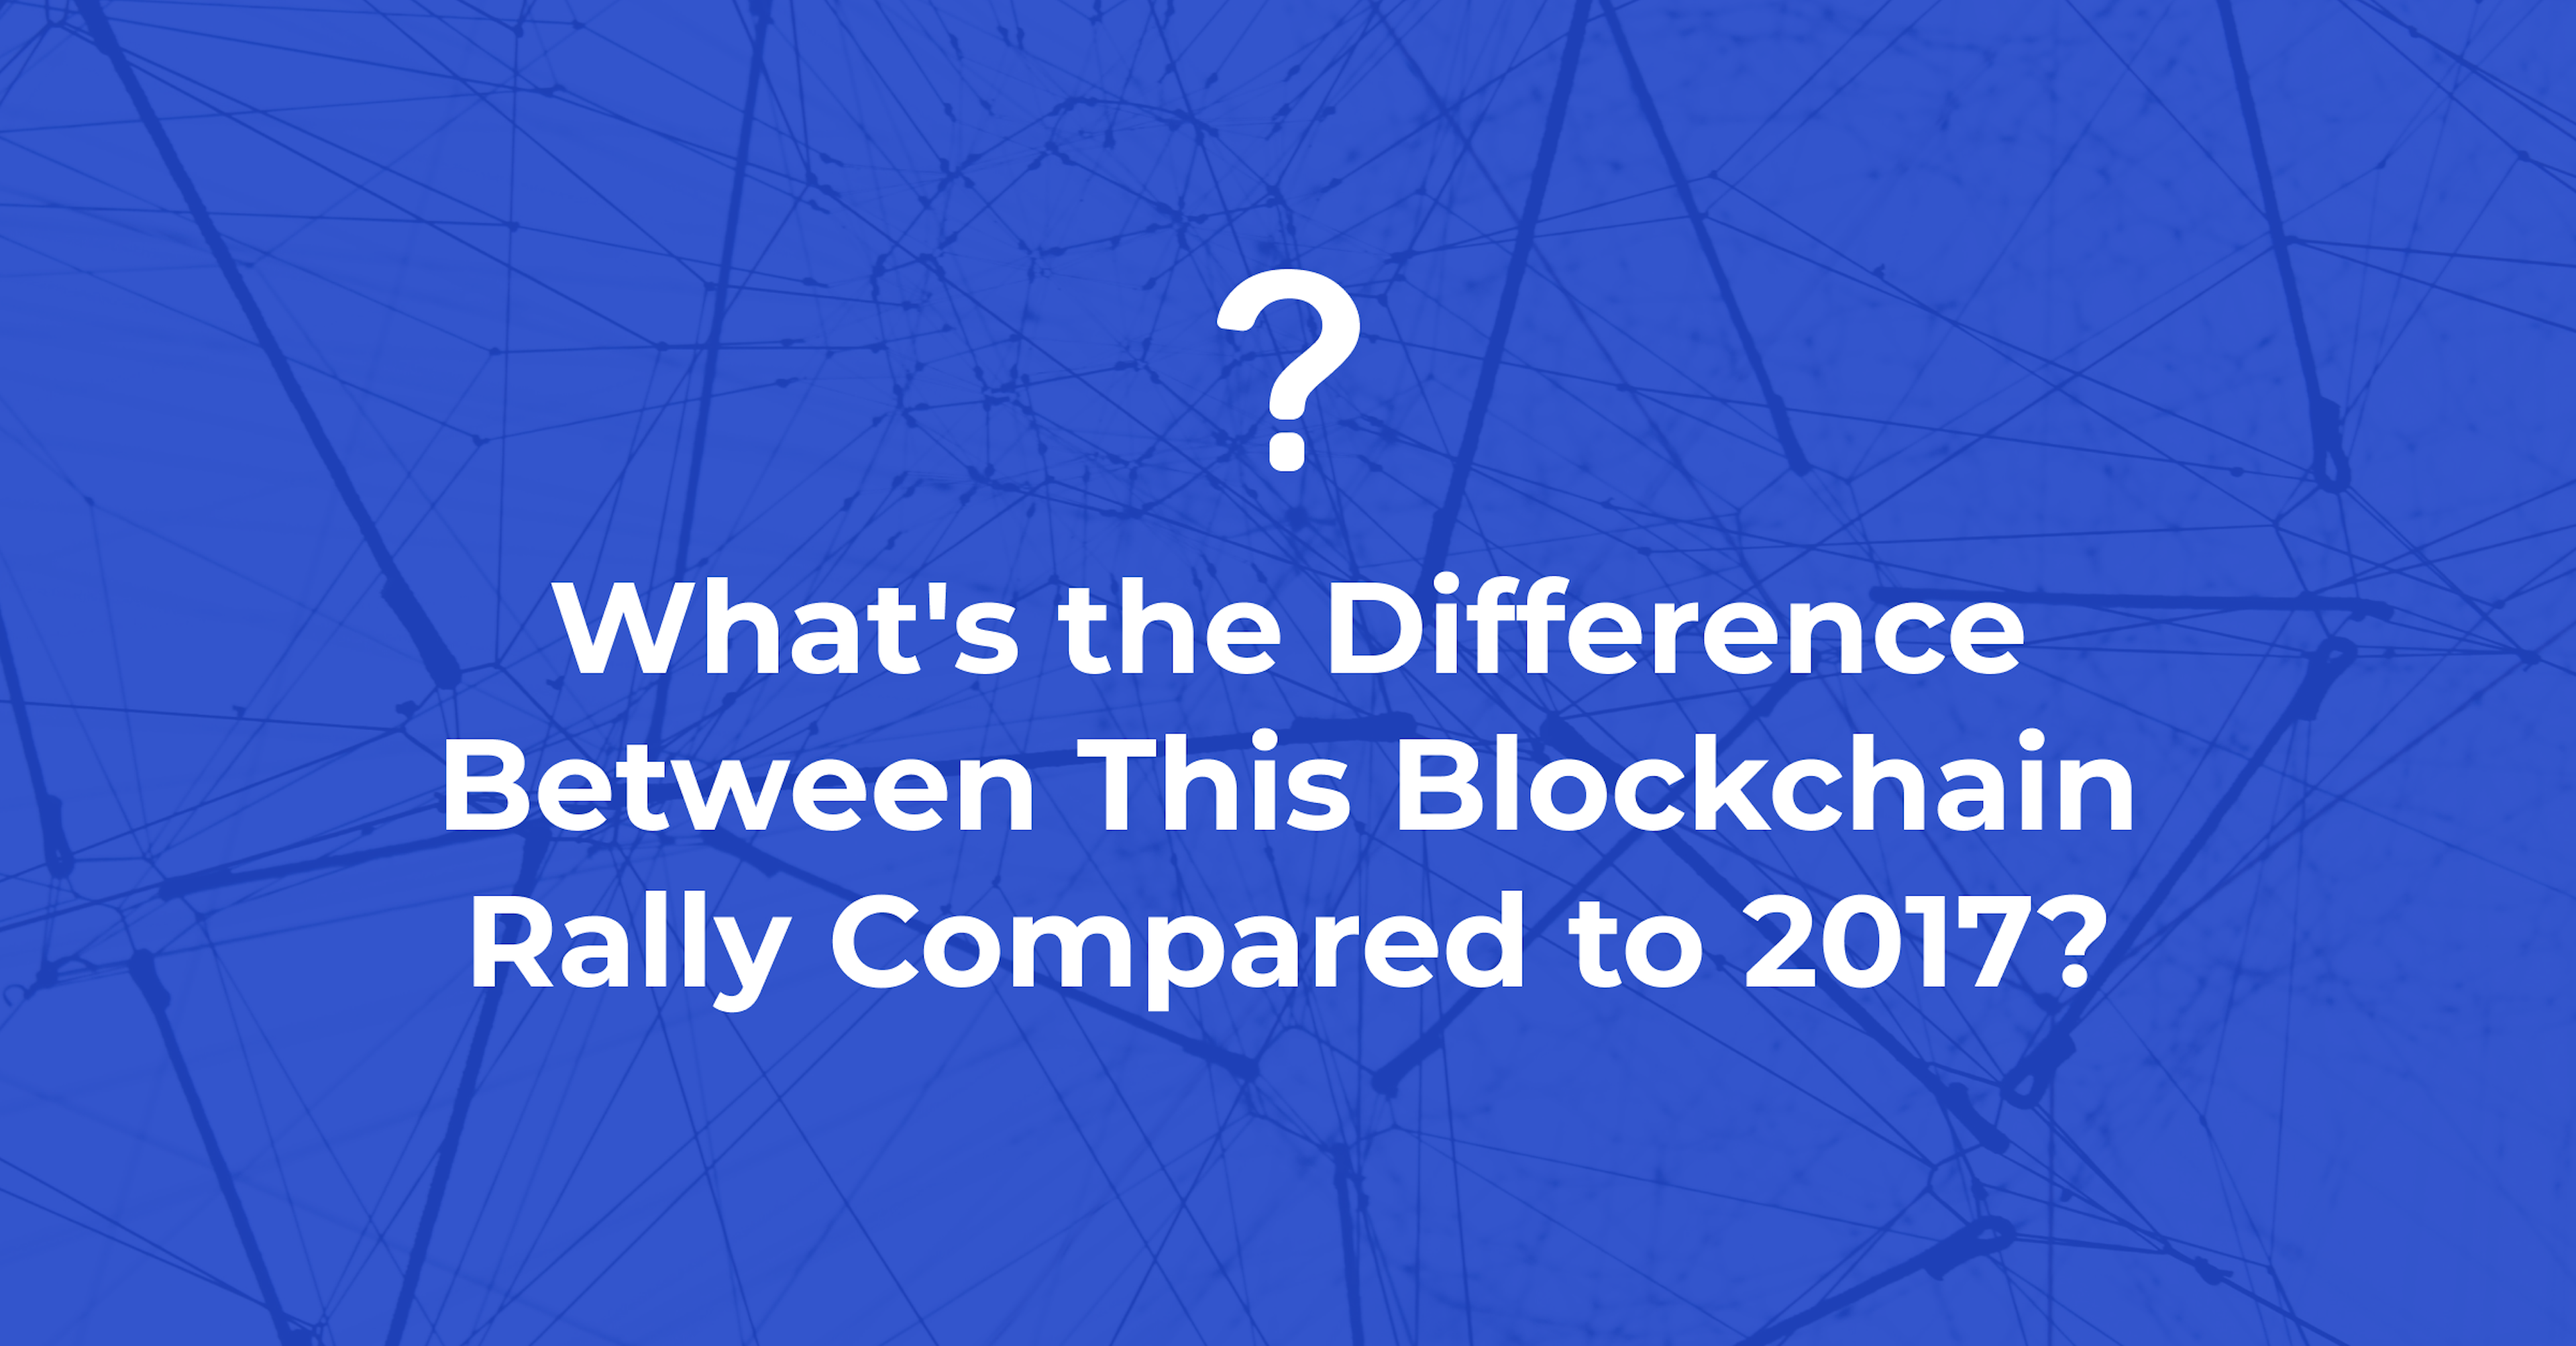 What's the Difference Between This Blockchain Rally Compared to 2017?